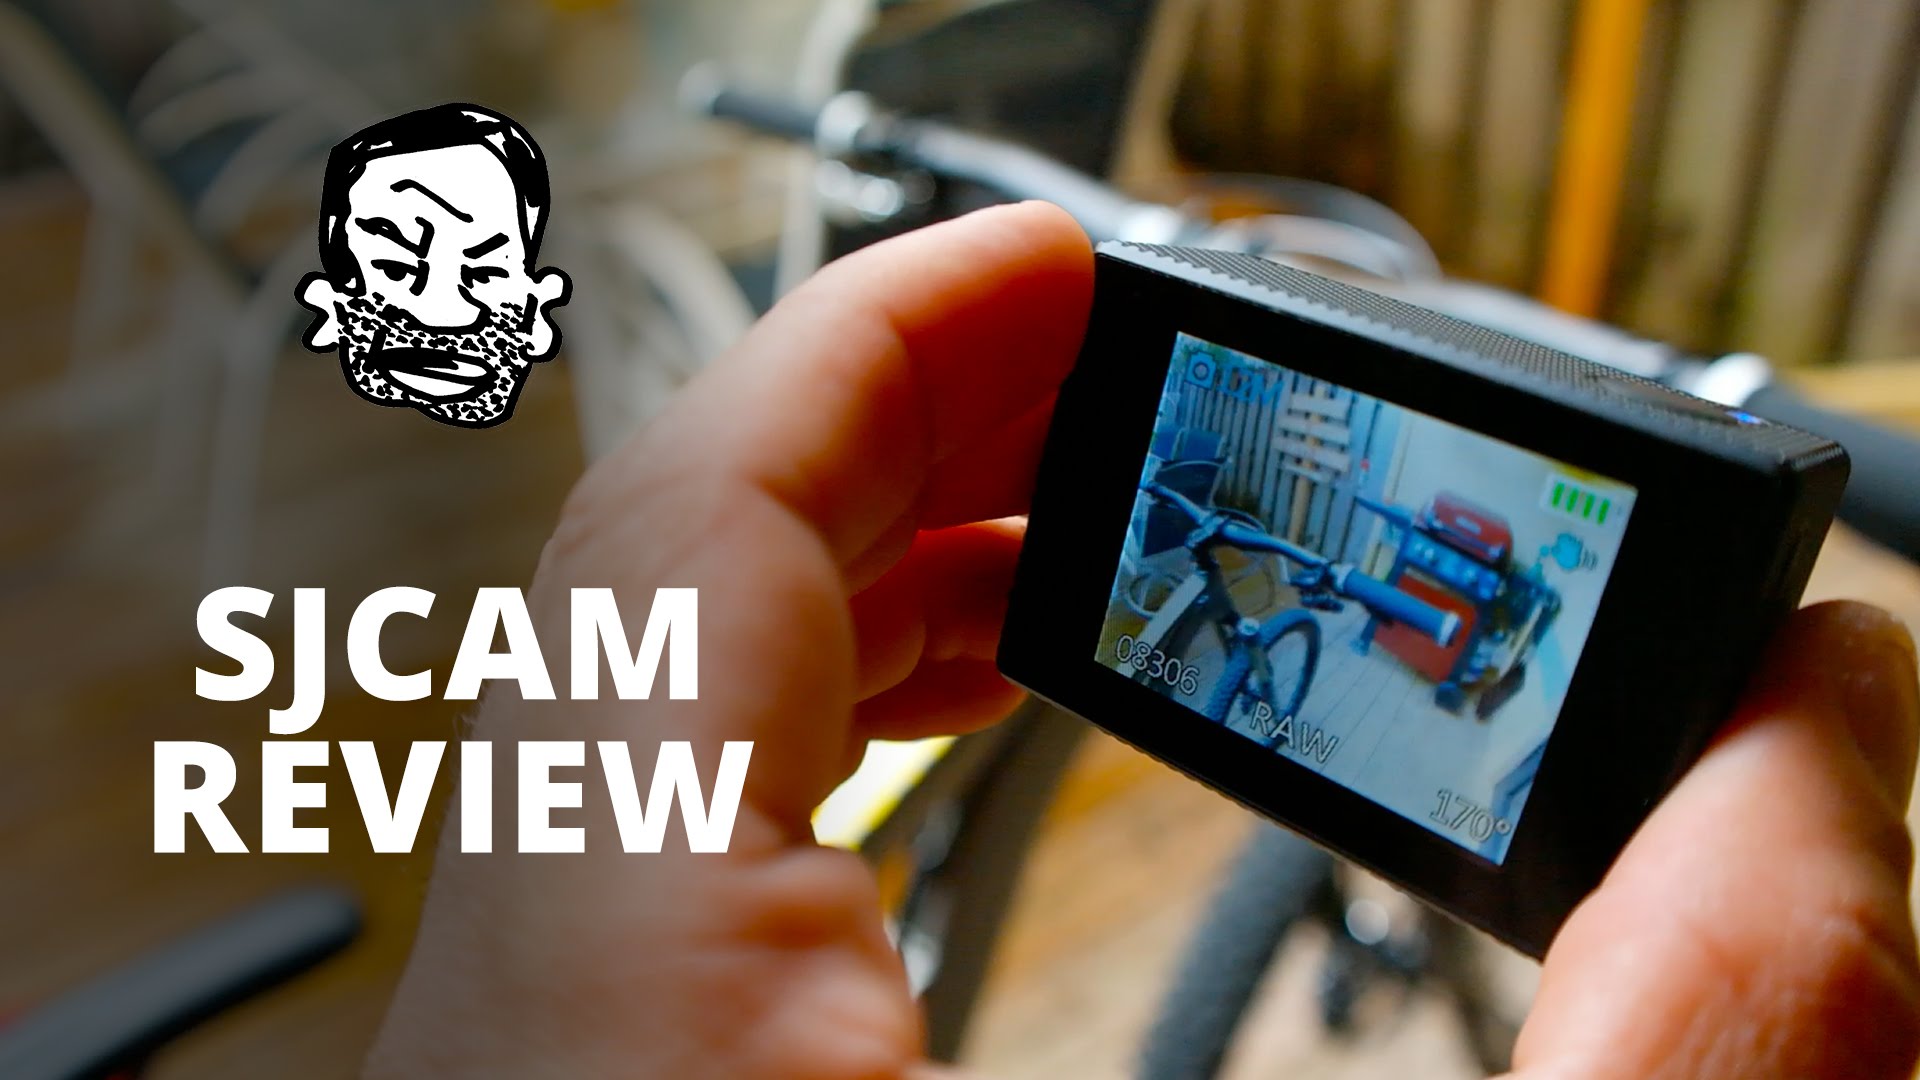 Are cheap action cams worth it? SJCAM Review